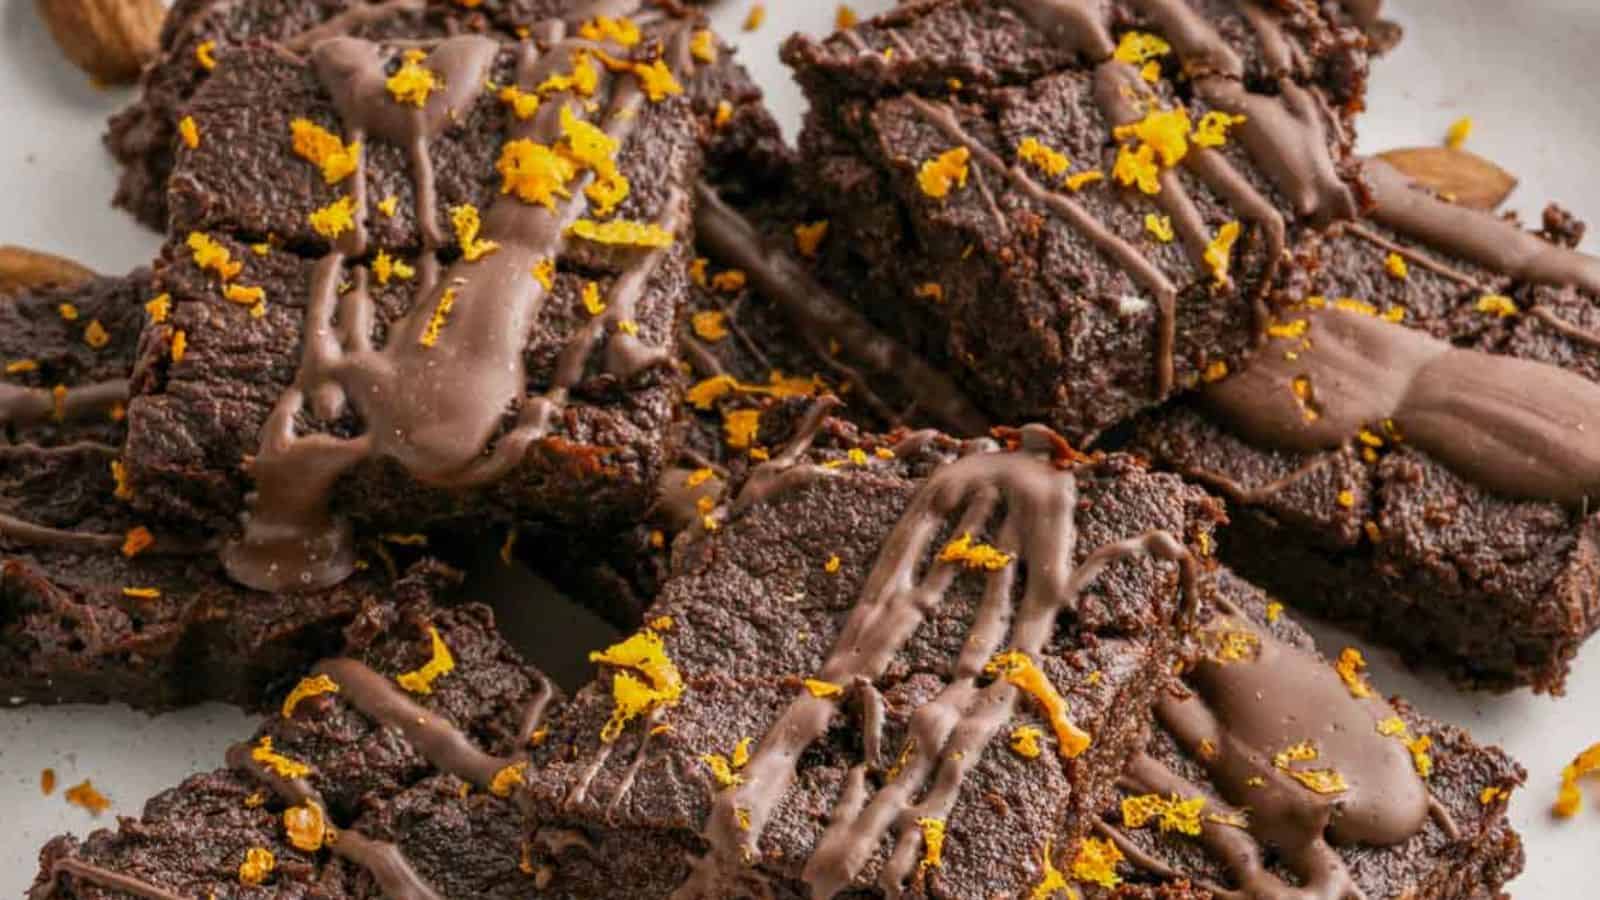 <p>Get ready to have your mind blown with our sweet potato brownies! Imagine fudgy, chocolatey goodness with a hint of sweet potato flavor – it’s like dessert heaven on a plate. Whether you’re indulging in them as a guilt-free treat or serving them up at your next gathering, these brownies are sure to impress. Plus, they’re so easy to make, that you’ll be whipping up batches on the regular!<br><strong>Get the Recipe: </strong><a href="https://twocityvegans.com/sugar-free-sweet-potato-brownies/?utm_source=msn&utm_medium=page&utm_campaign=msn">Sweet Potato Brownies</a></p>